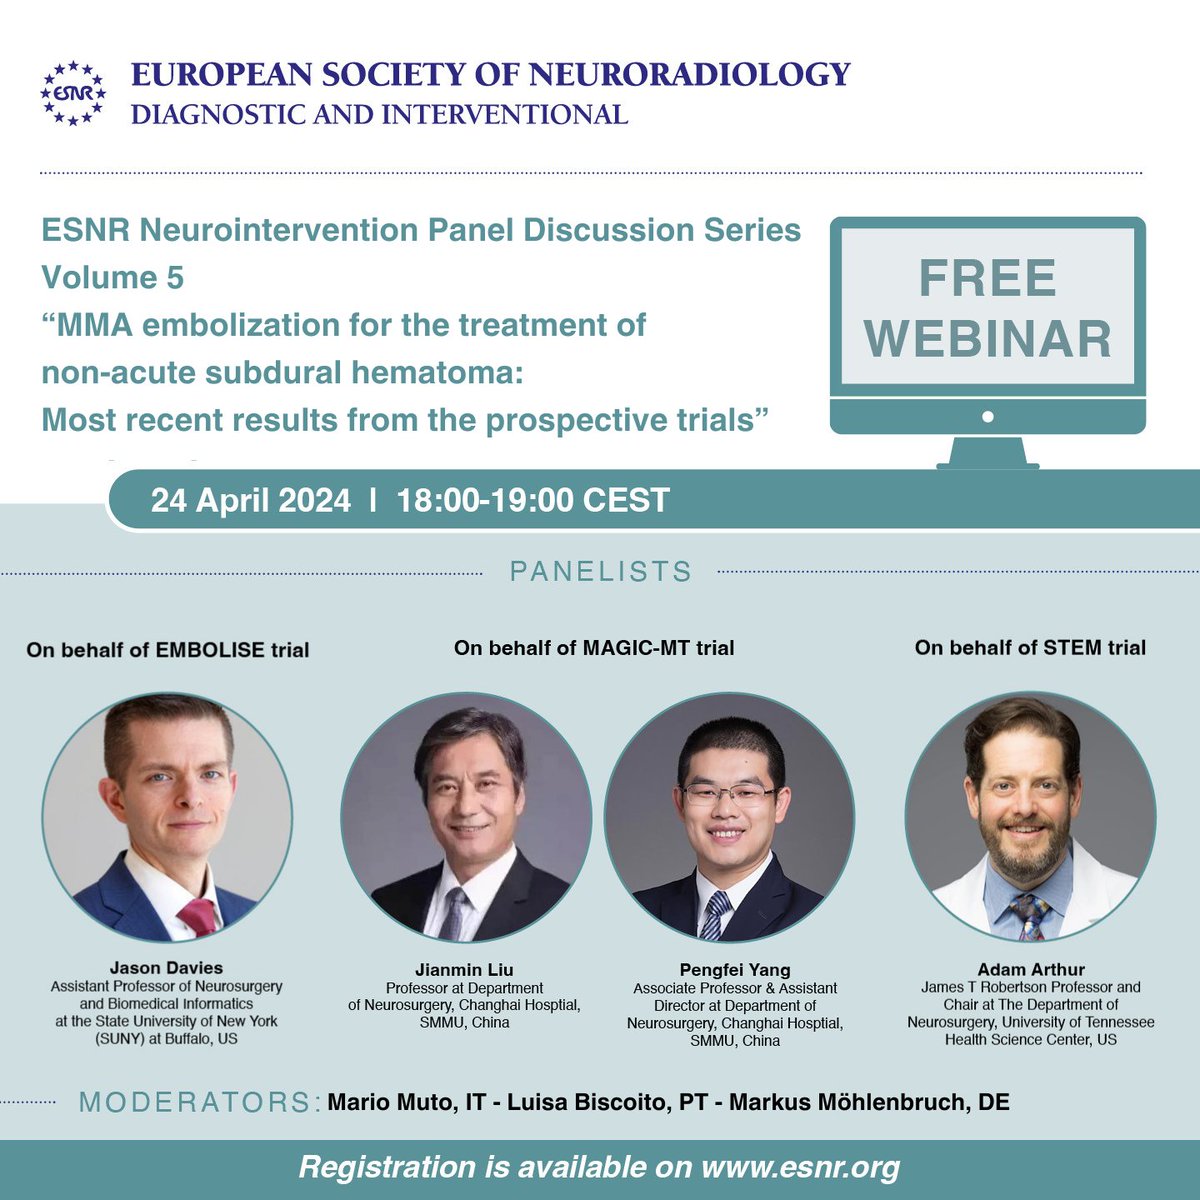 TODAY! ESNR Neurointervention Panel Discussion Series Volume 5: “MMA embolization for the treatment of non-acute subdural hematoma: Most recent results from the prospective trials” 📅 24 April 2024 🕐 18:00-19:00 CEST Free registration and info here: esnr.org/event-details/…